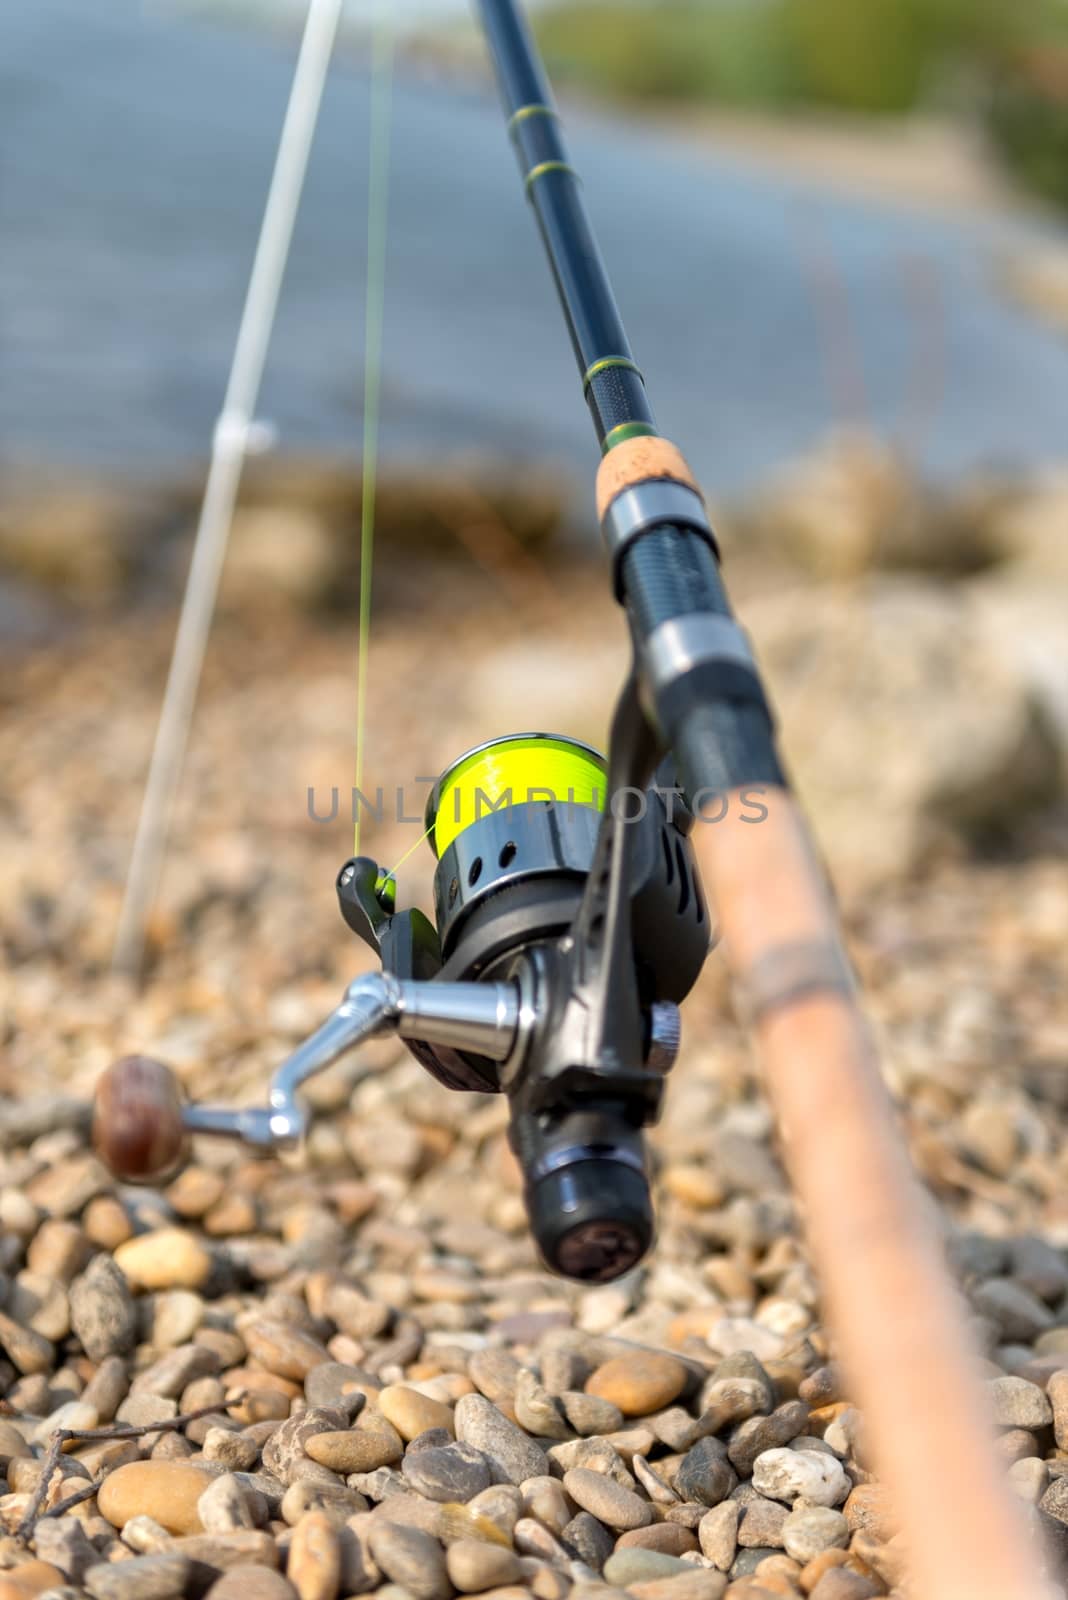 Modern clean fishing rod outdoors on the ground